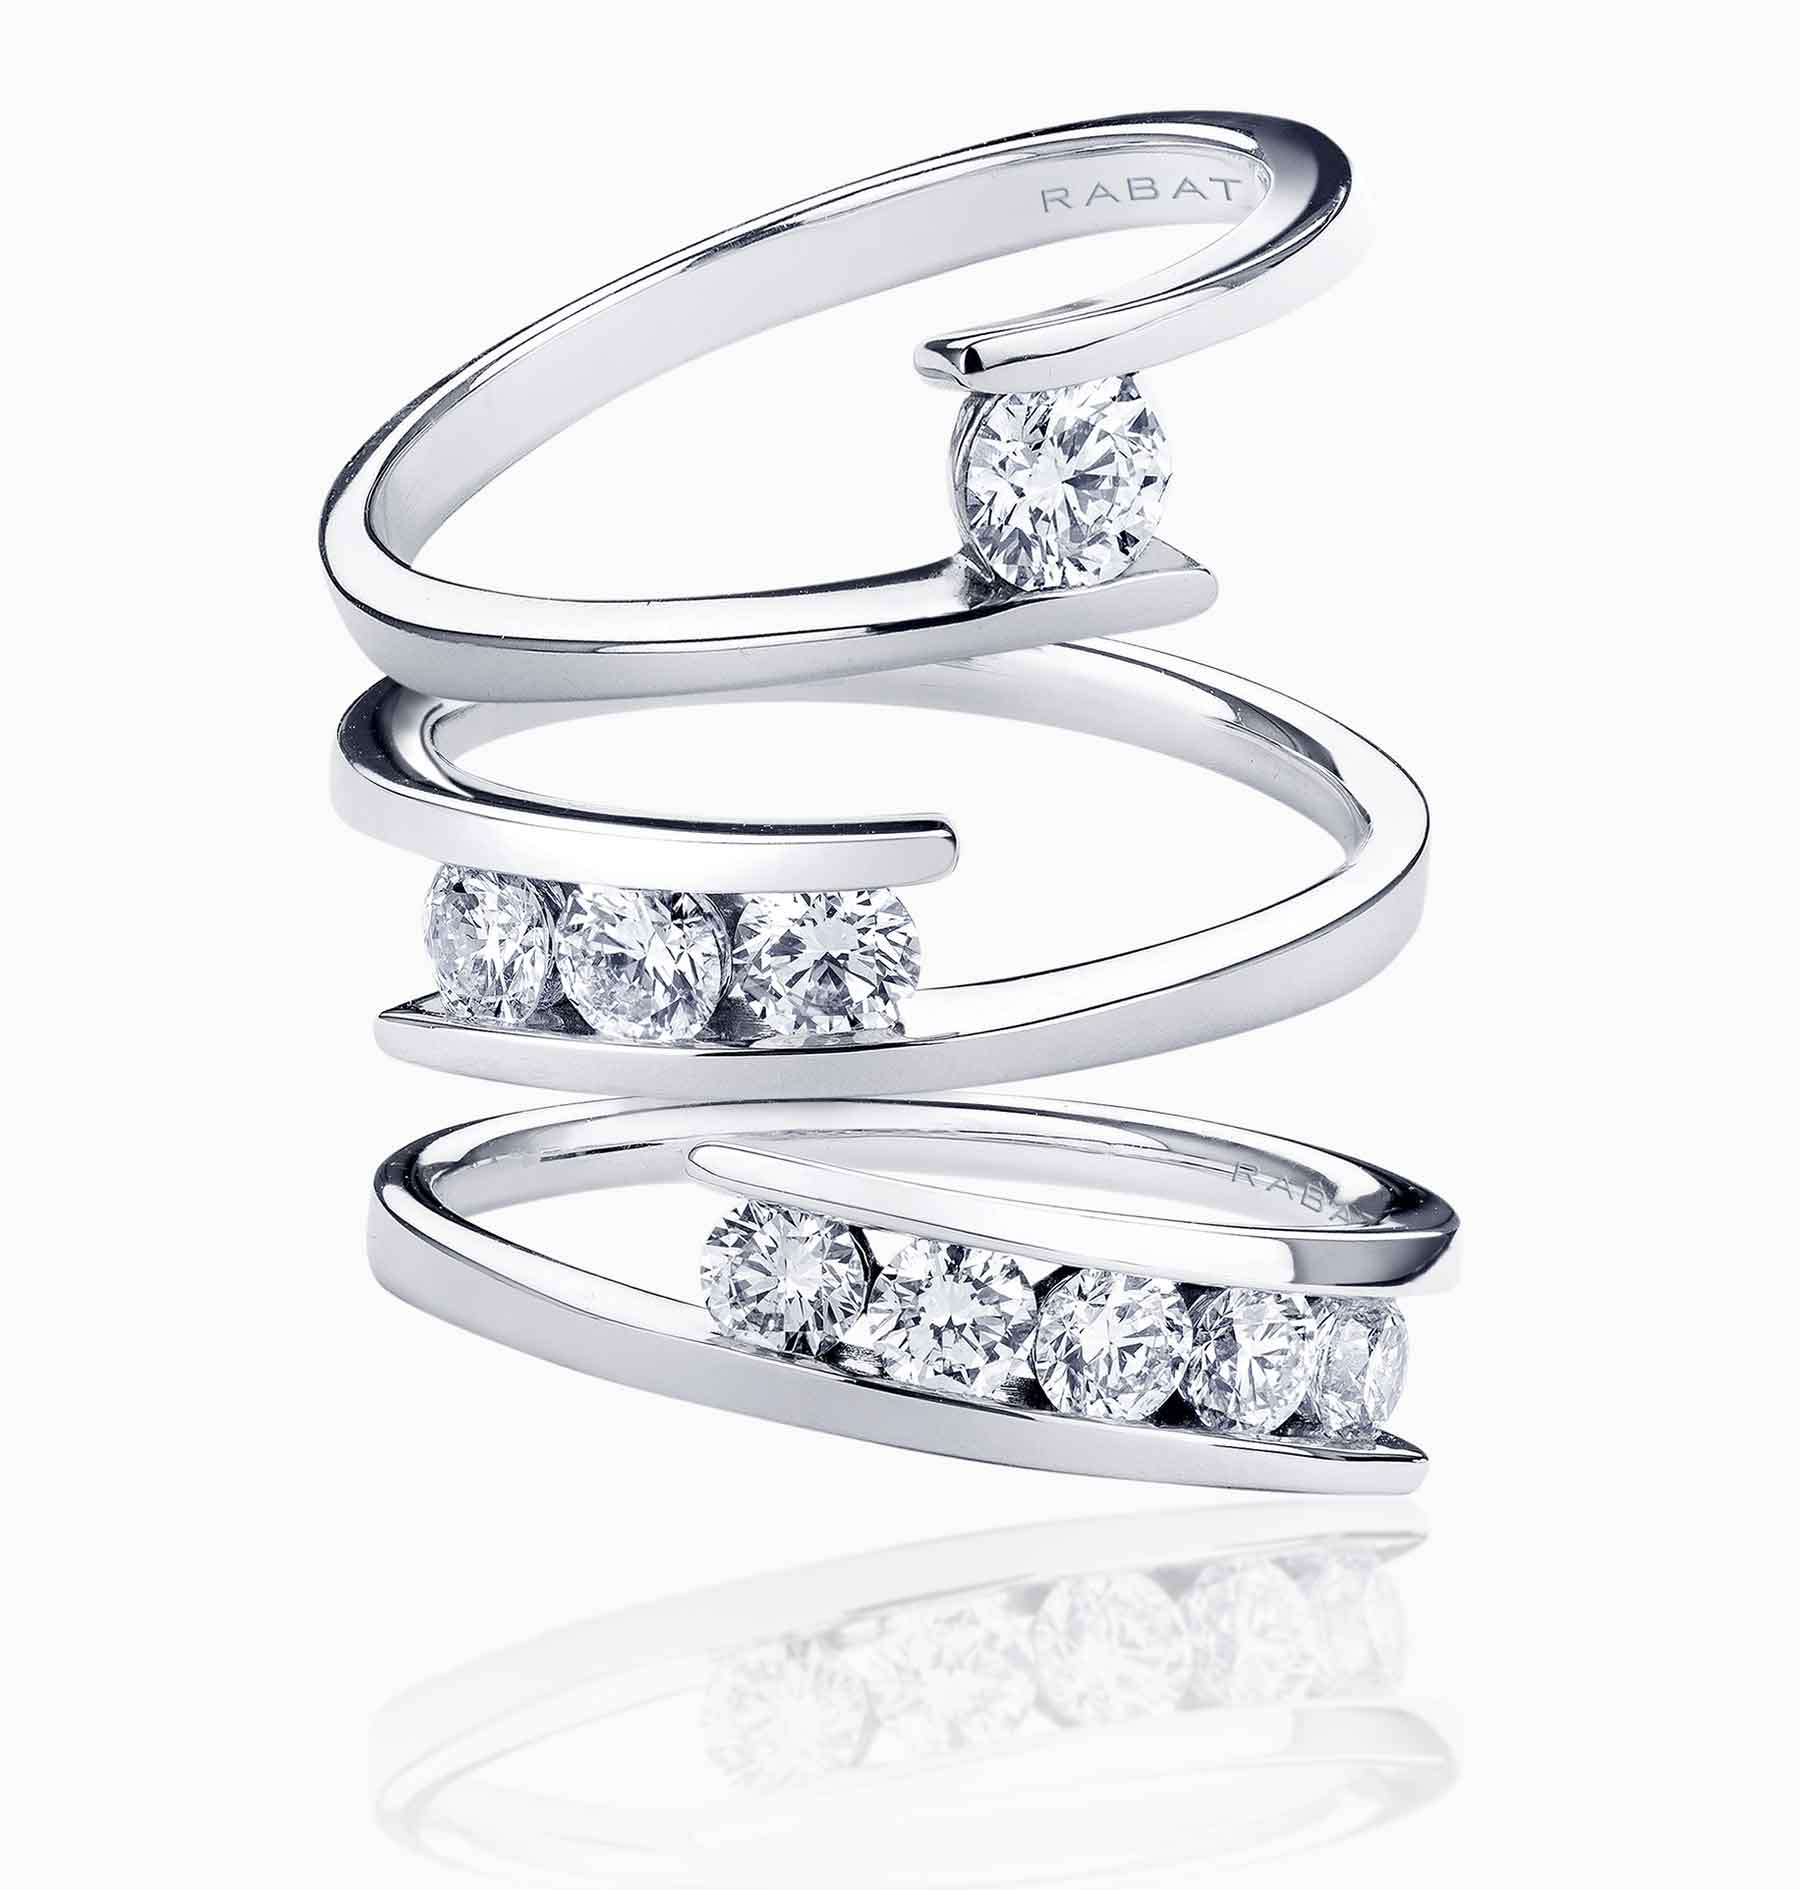 Engagement rings with Bridge of Love Bridal Collection at RABAT jewelry